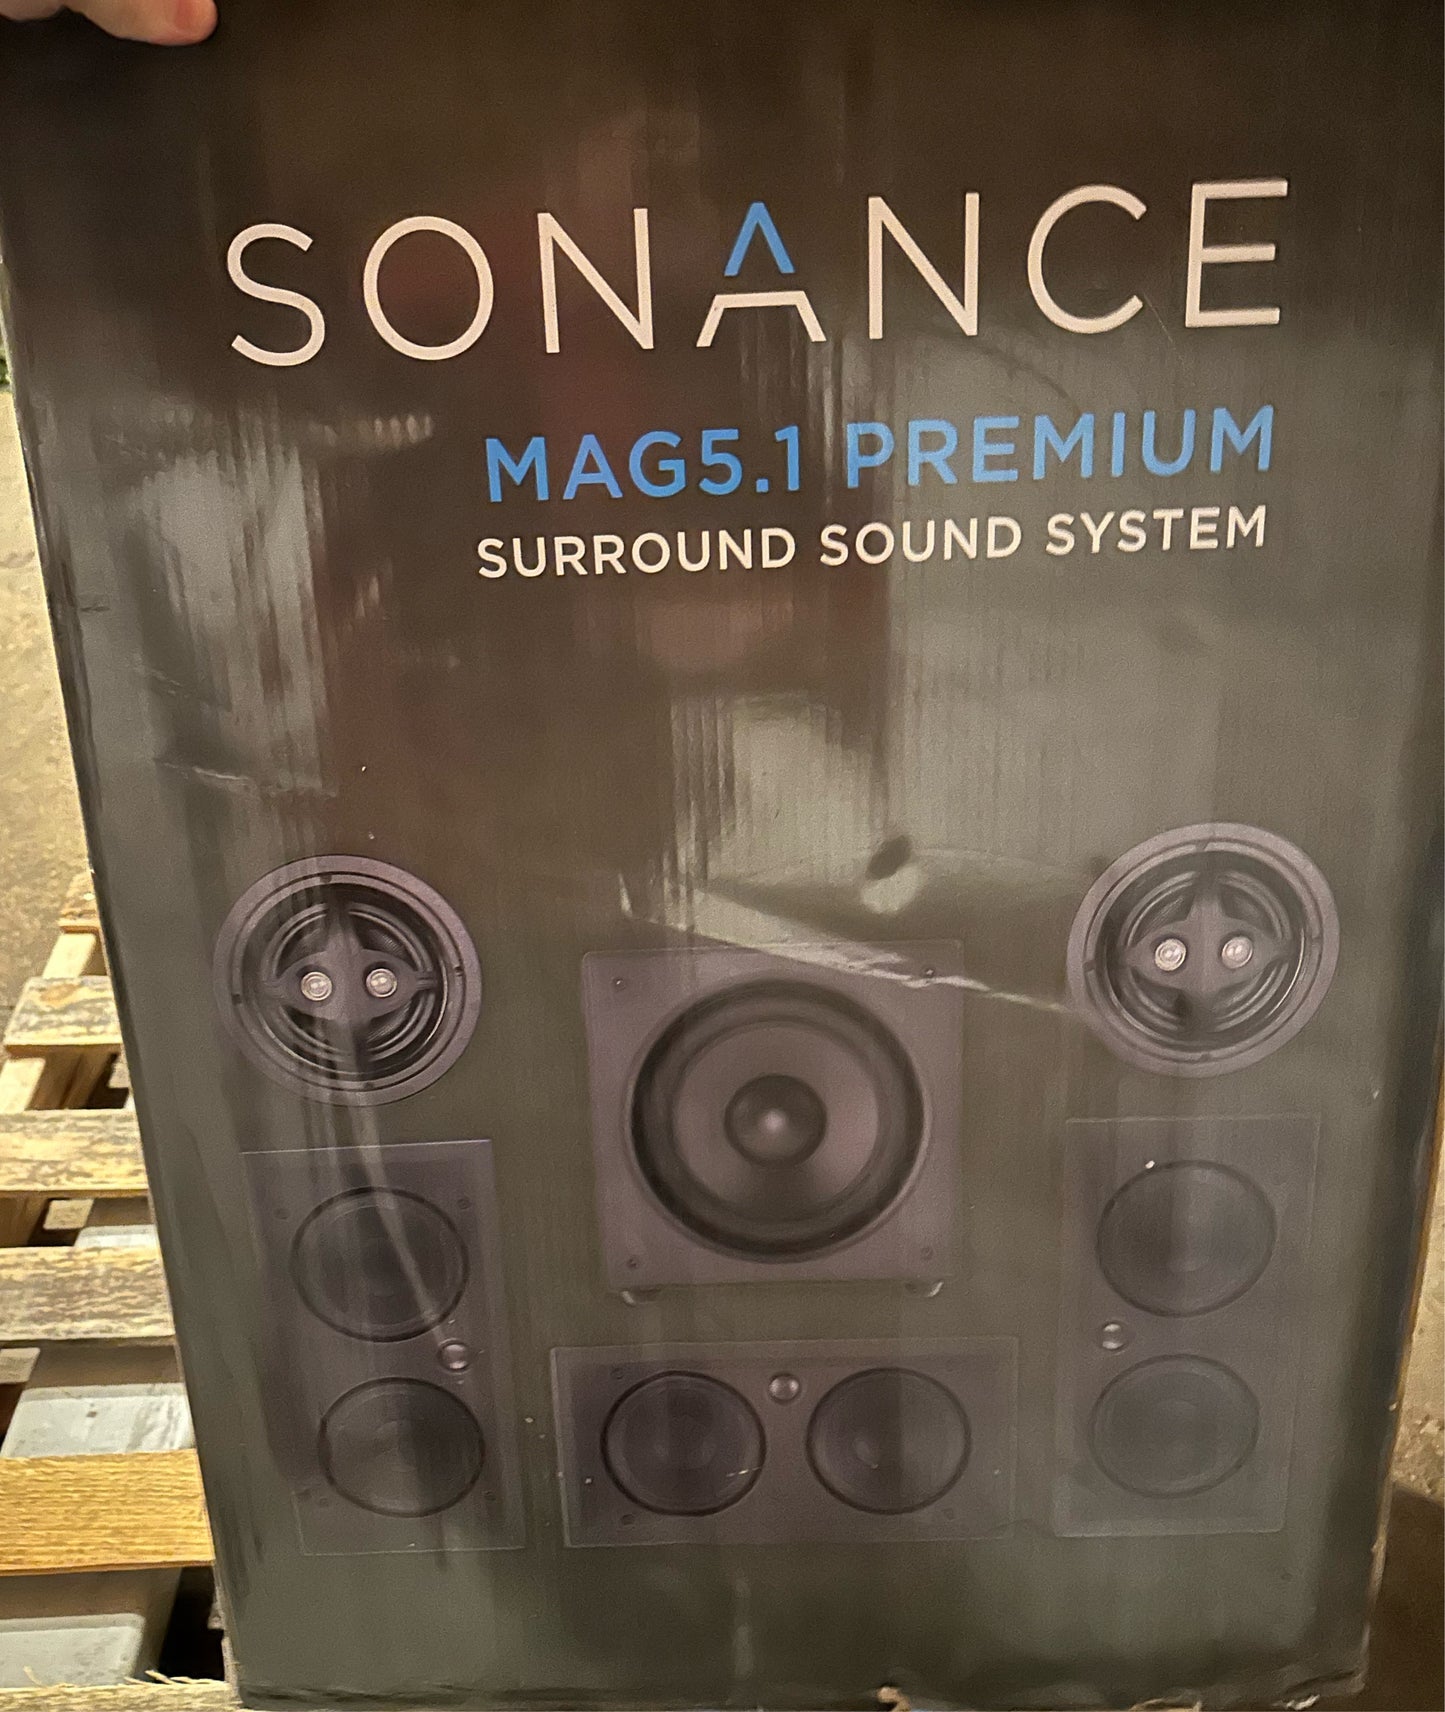 Sonance MAG5.1 Premium Speaker System for Home Theater 5.1-channel